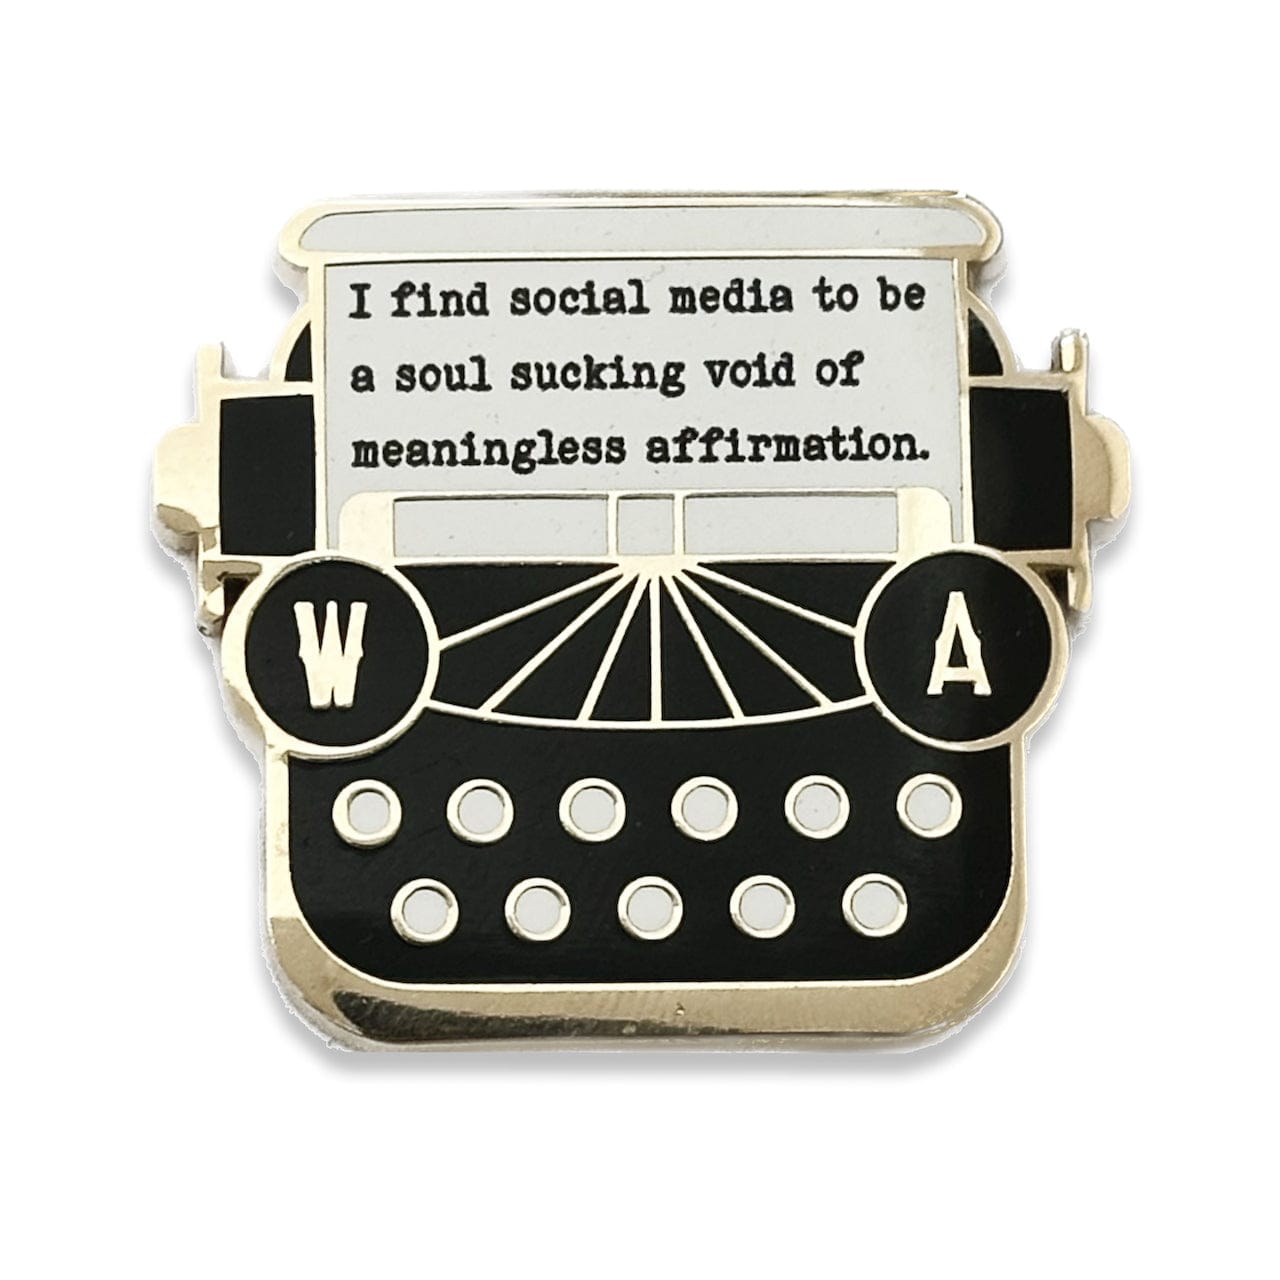 Pinbuds Enamel pin Typewriter pin featuring Wednesday Adam's quote  "I find social media to be a soul-sucking void of meaningless affirmation."